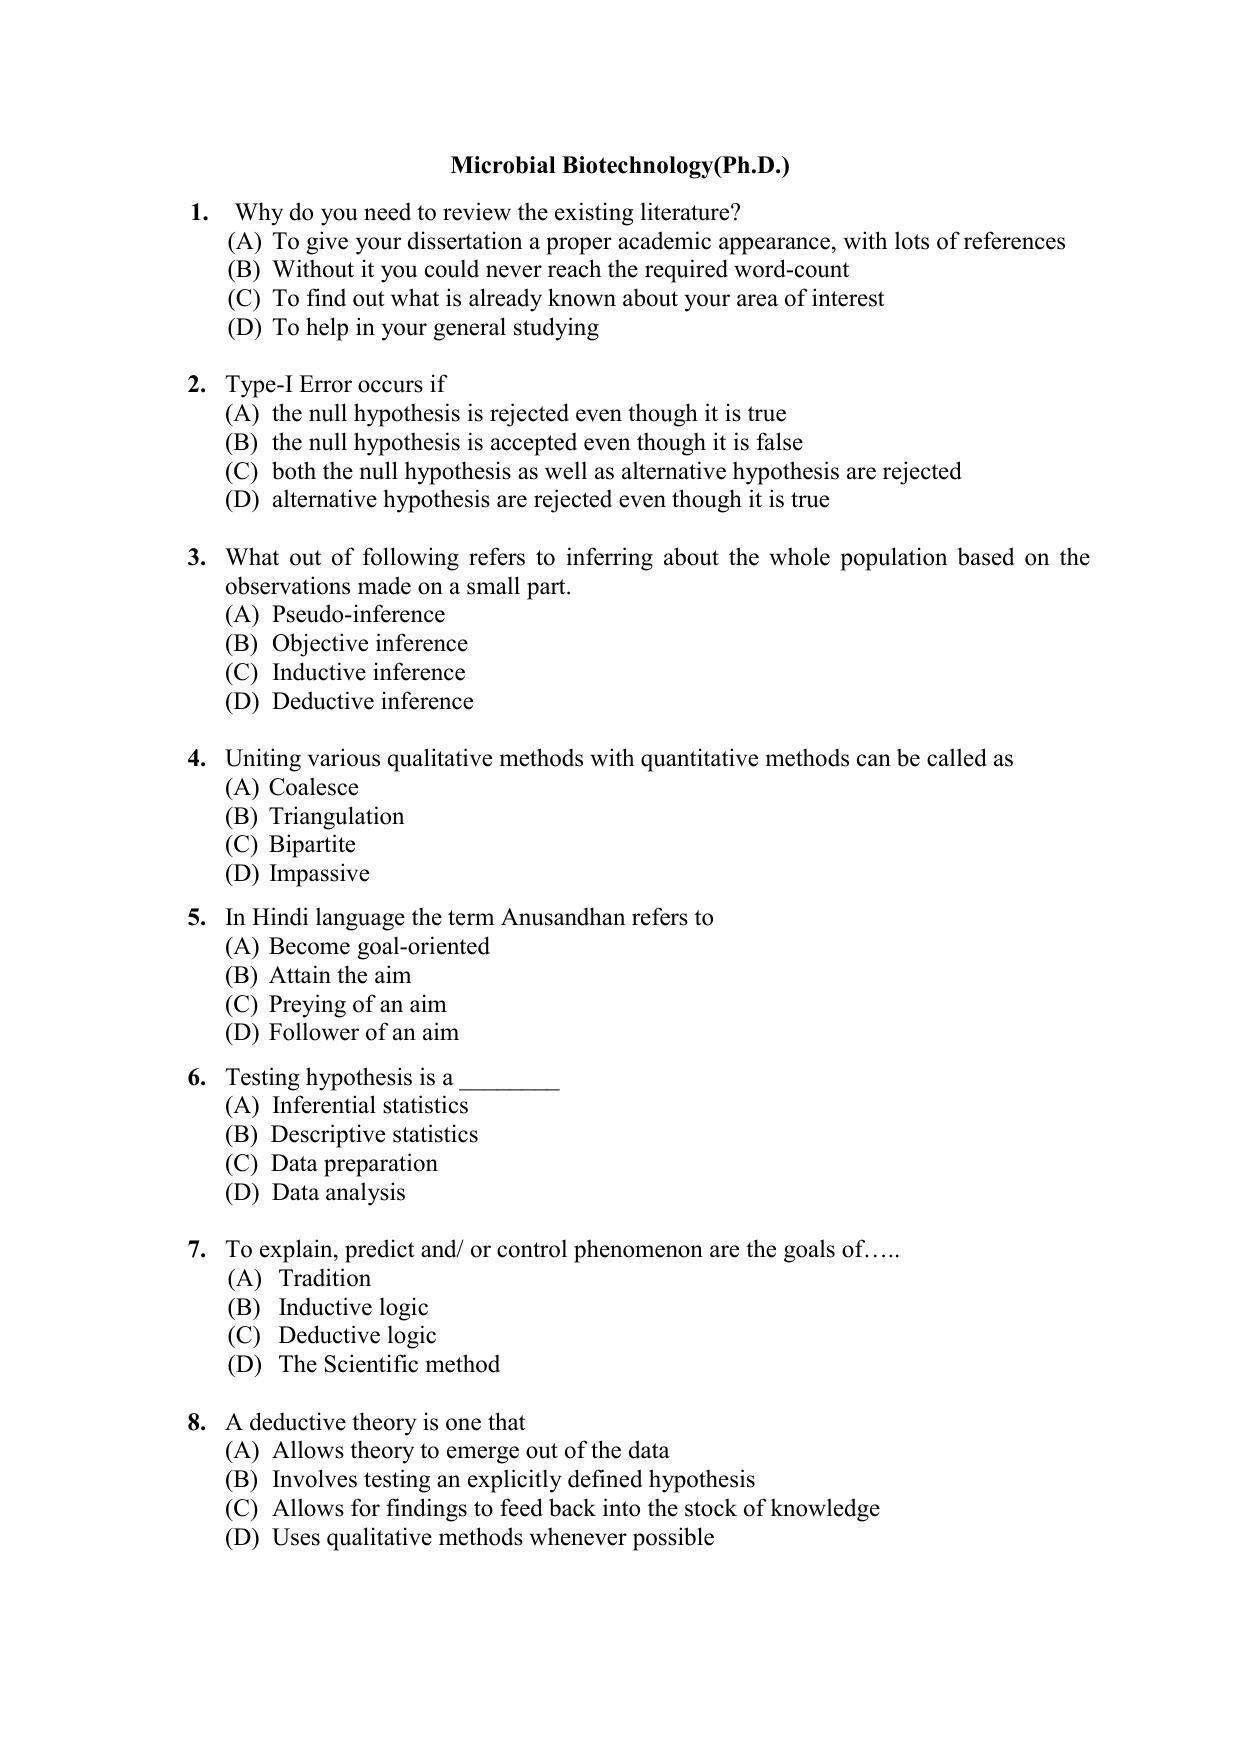 PU MPET Anthropology 2022 Question Papers - Page 42